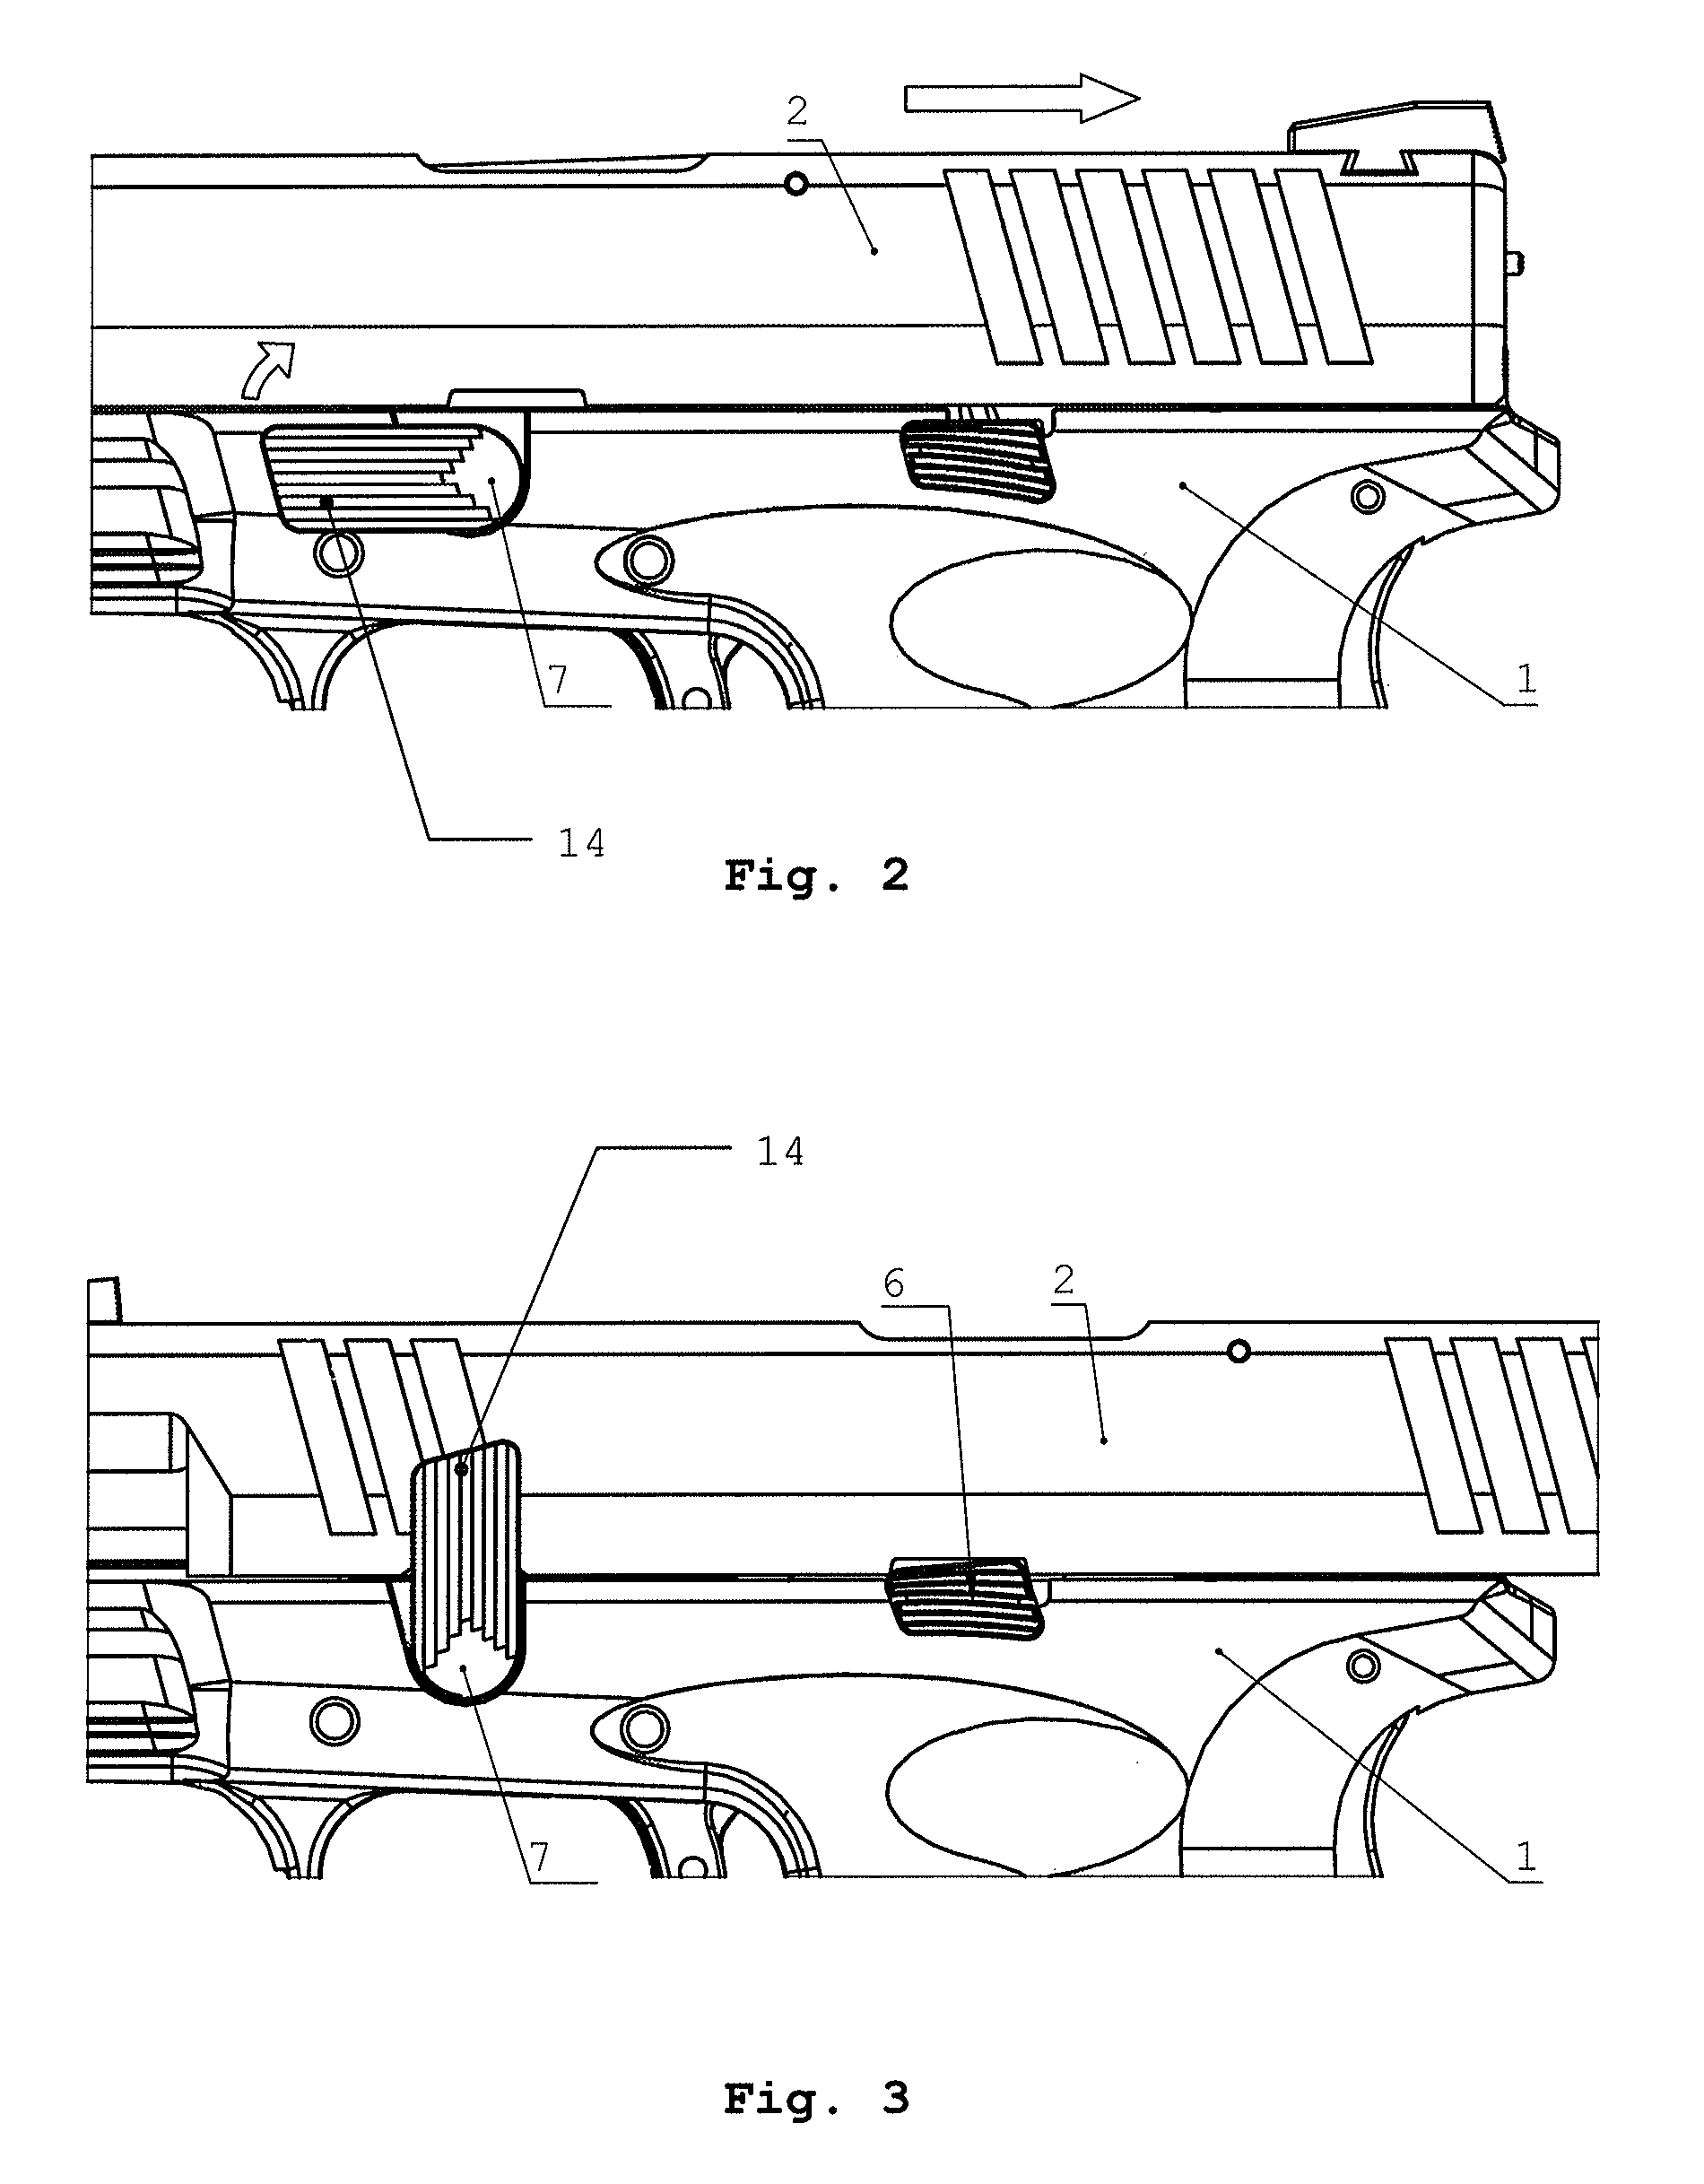 Mechanism for the disassembly of a handgun without triggering